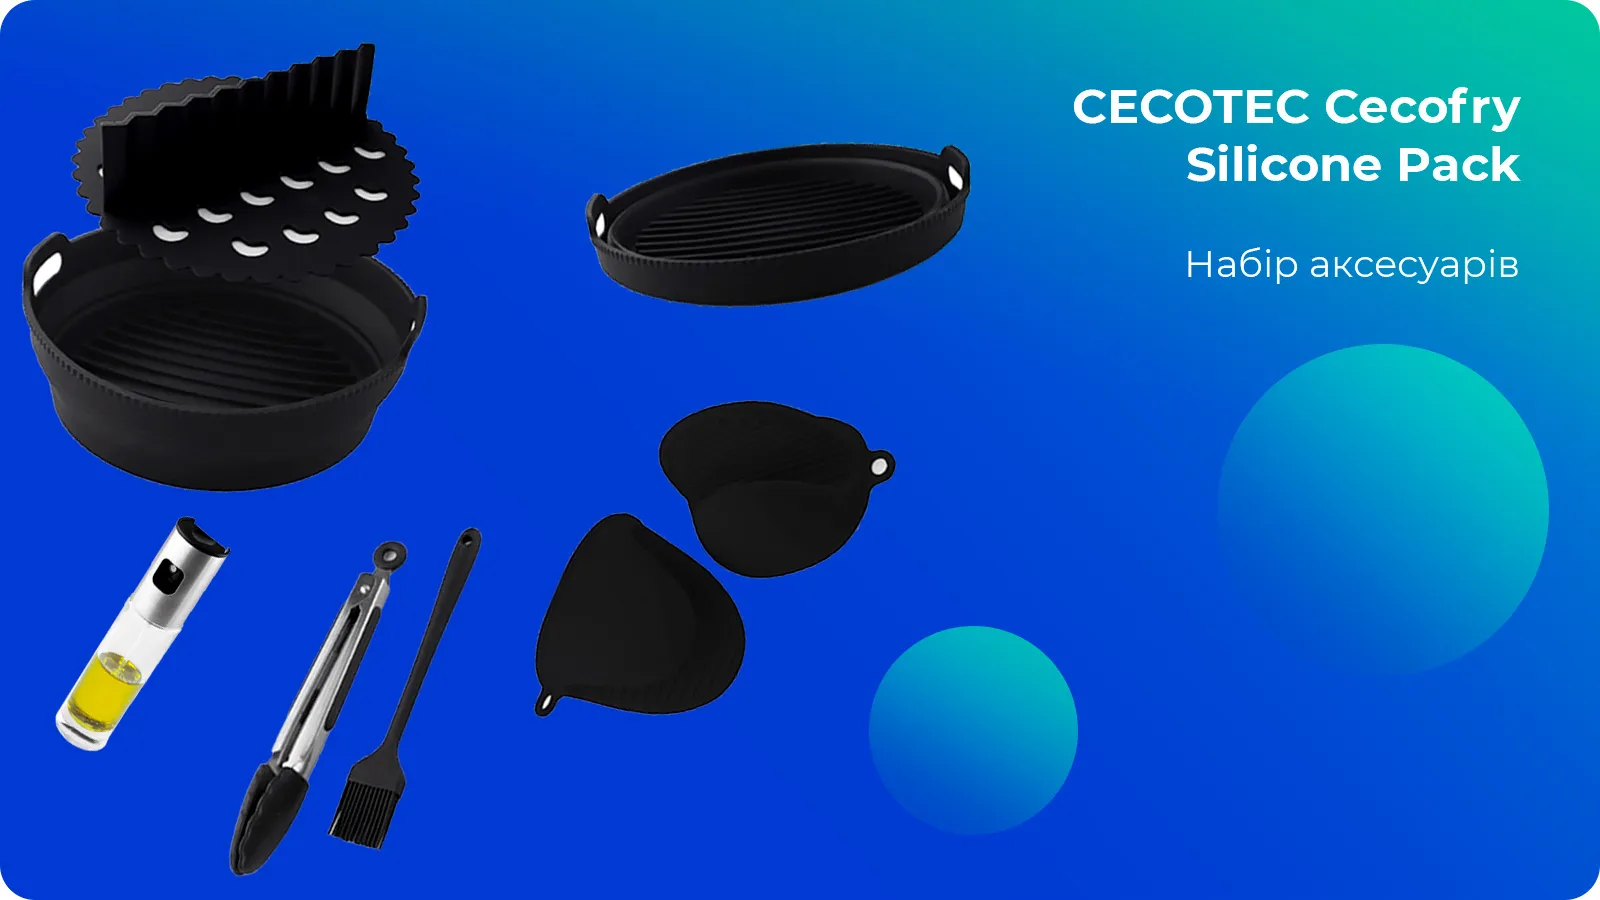 CECOTEC Cecofry Silicone Pack